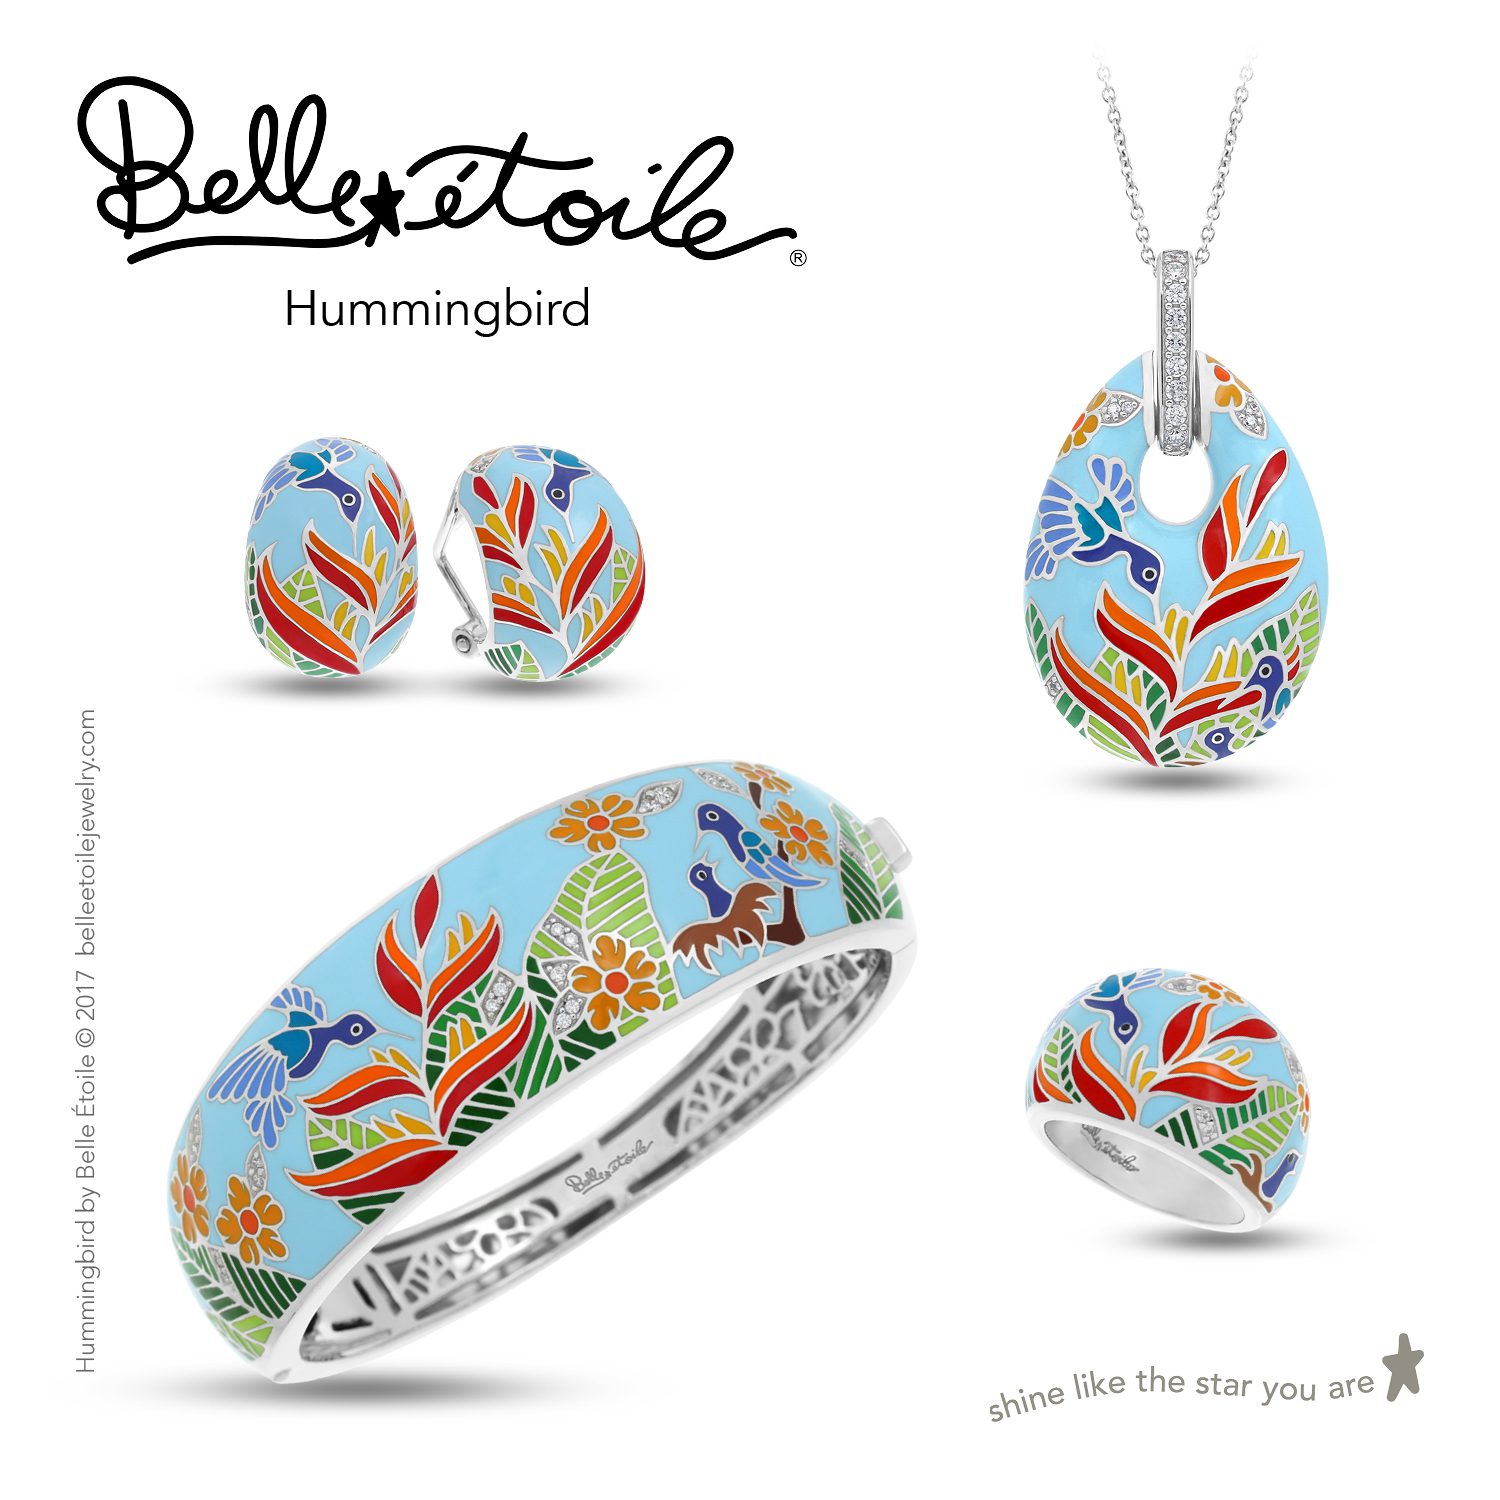 Belle Étoile Jewelry Hummingbird collection